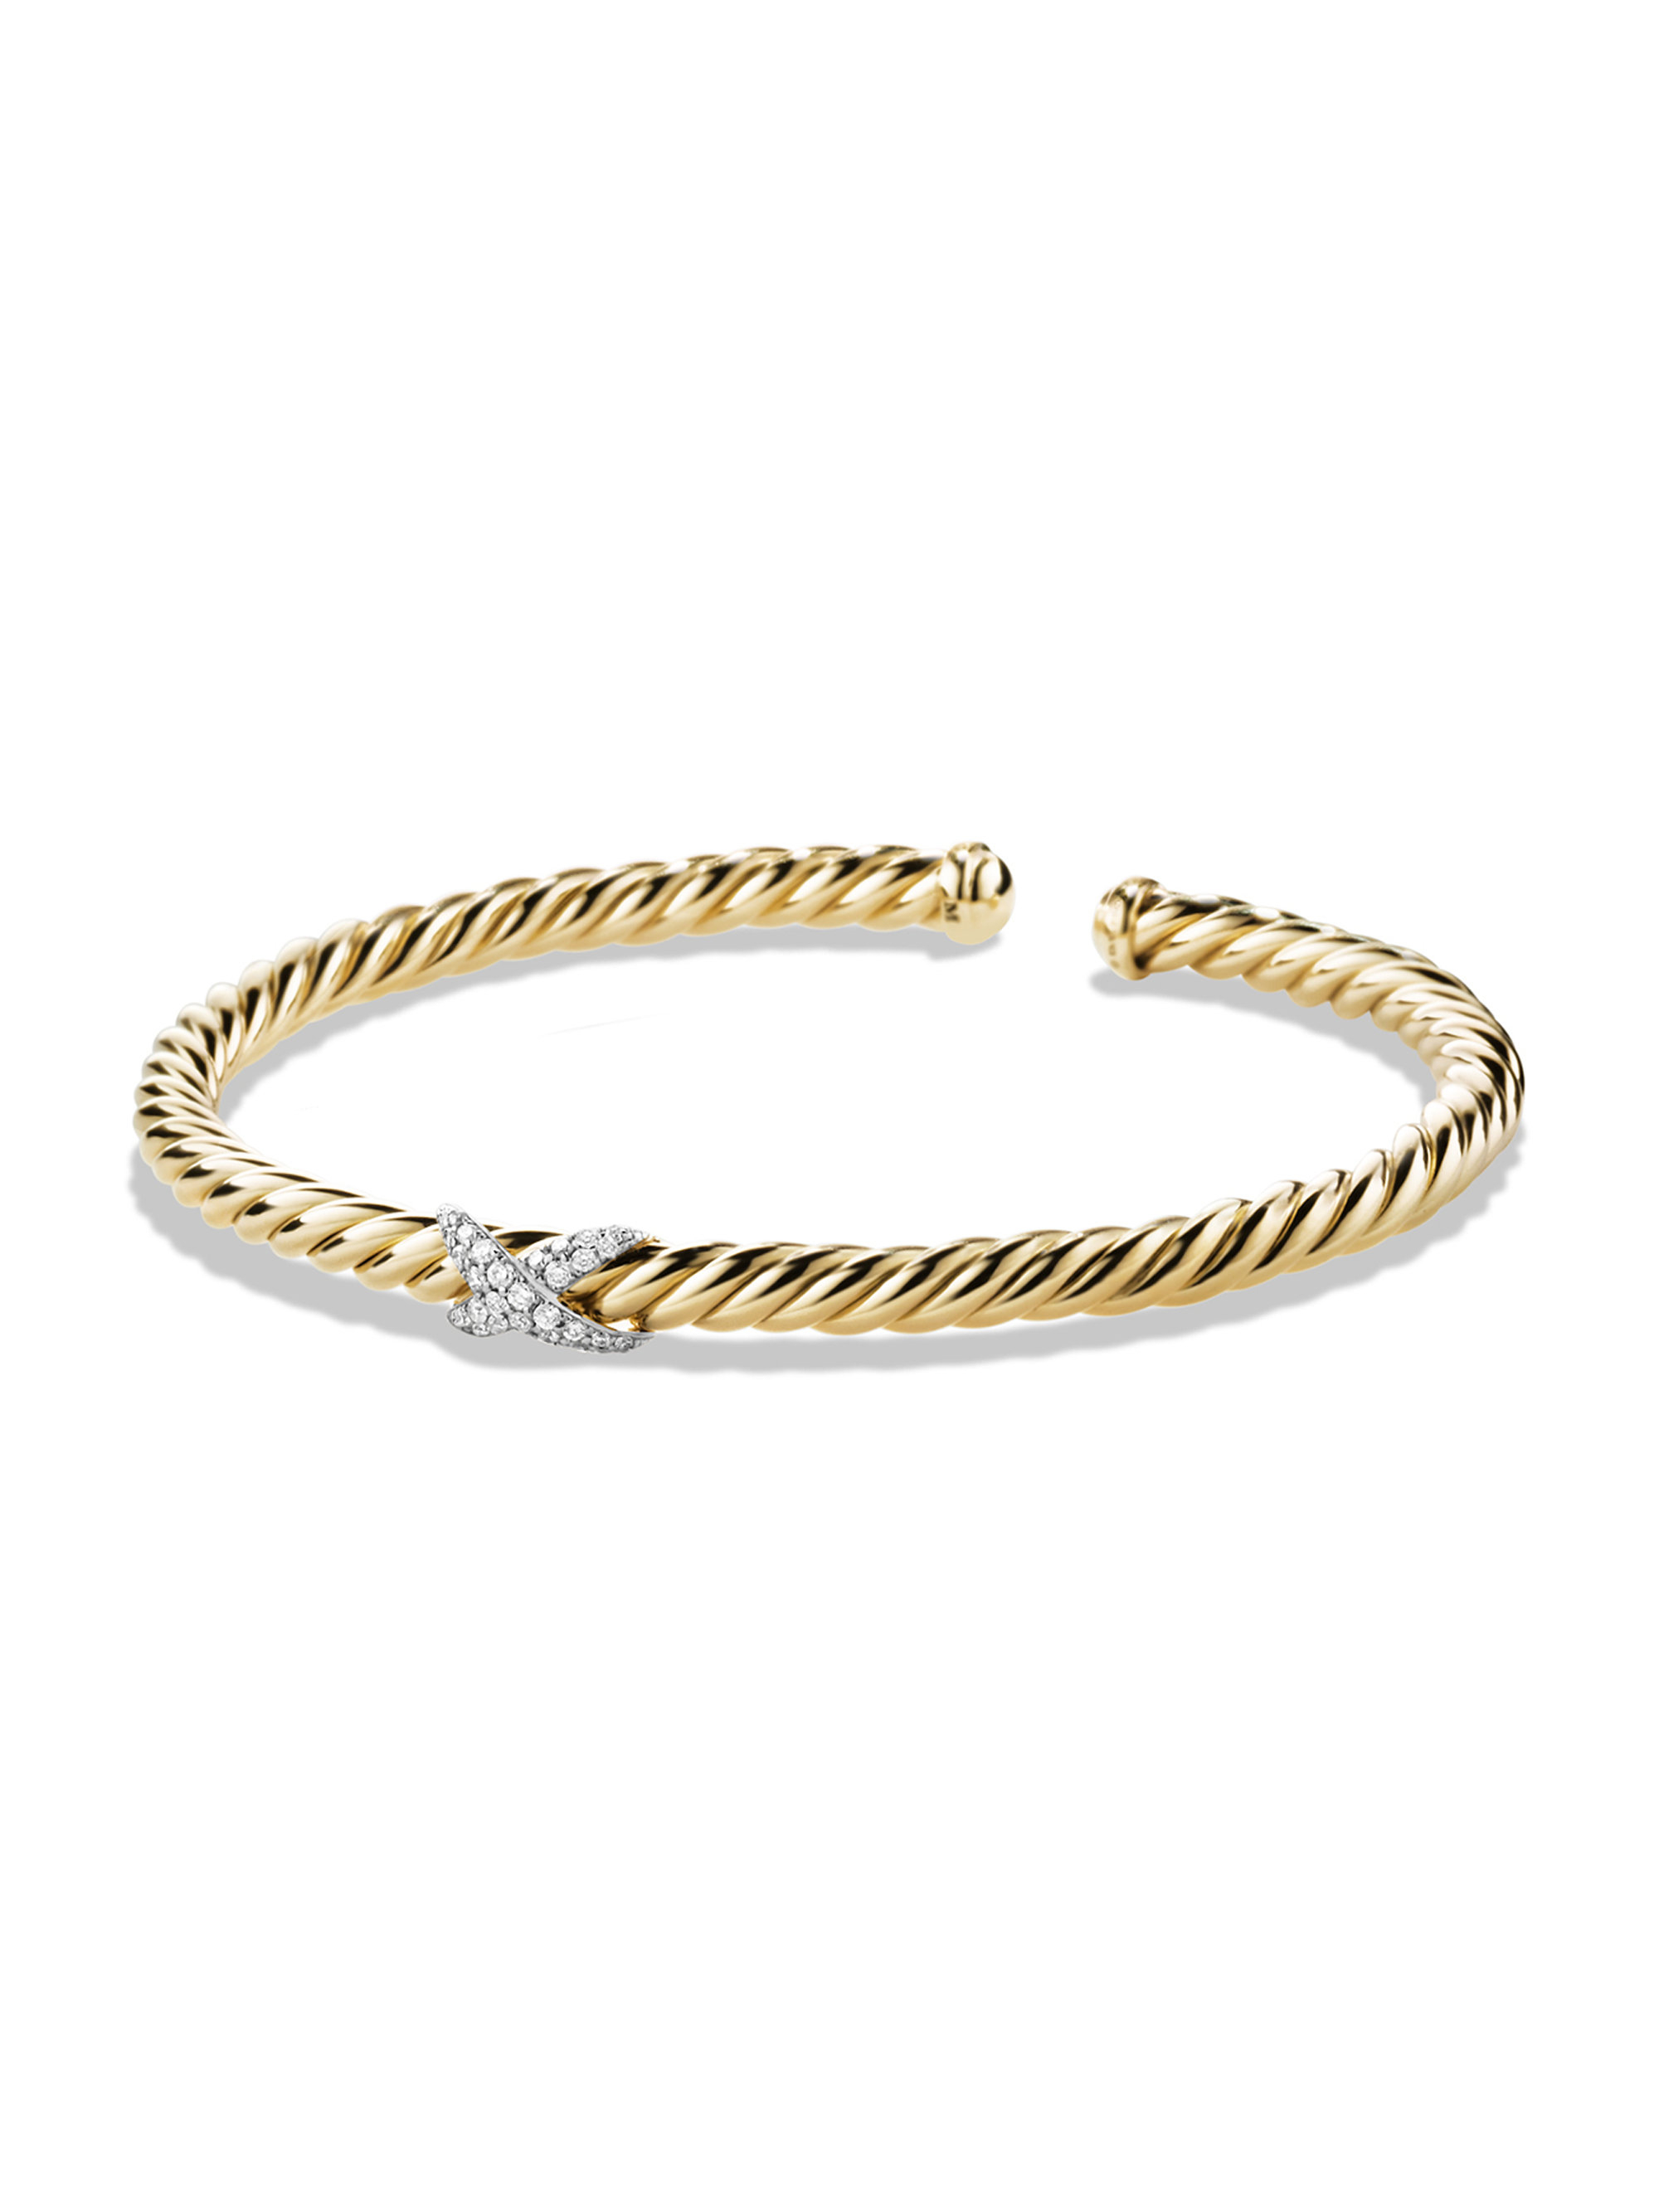 David Yurman Silver Gold X Bracelet With Diamonds In 18k Gold Silver Product 0 338318314 Normal 